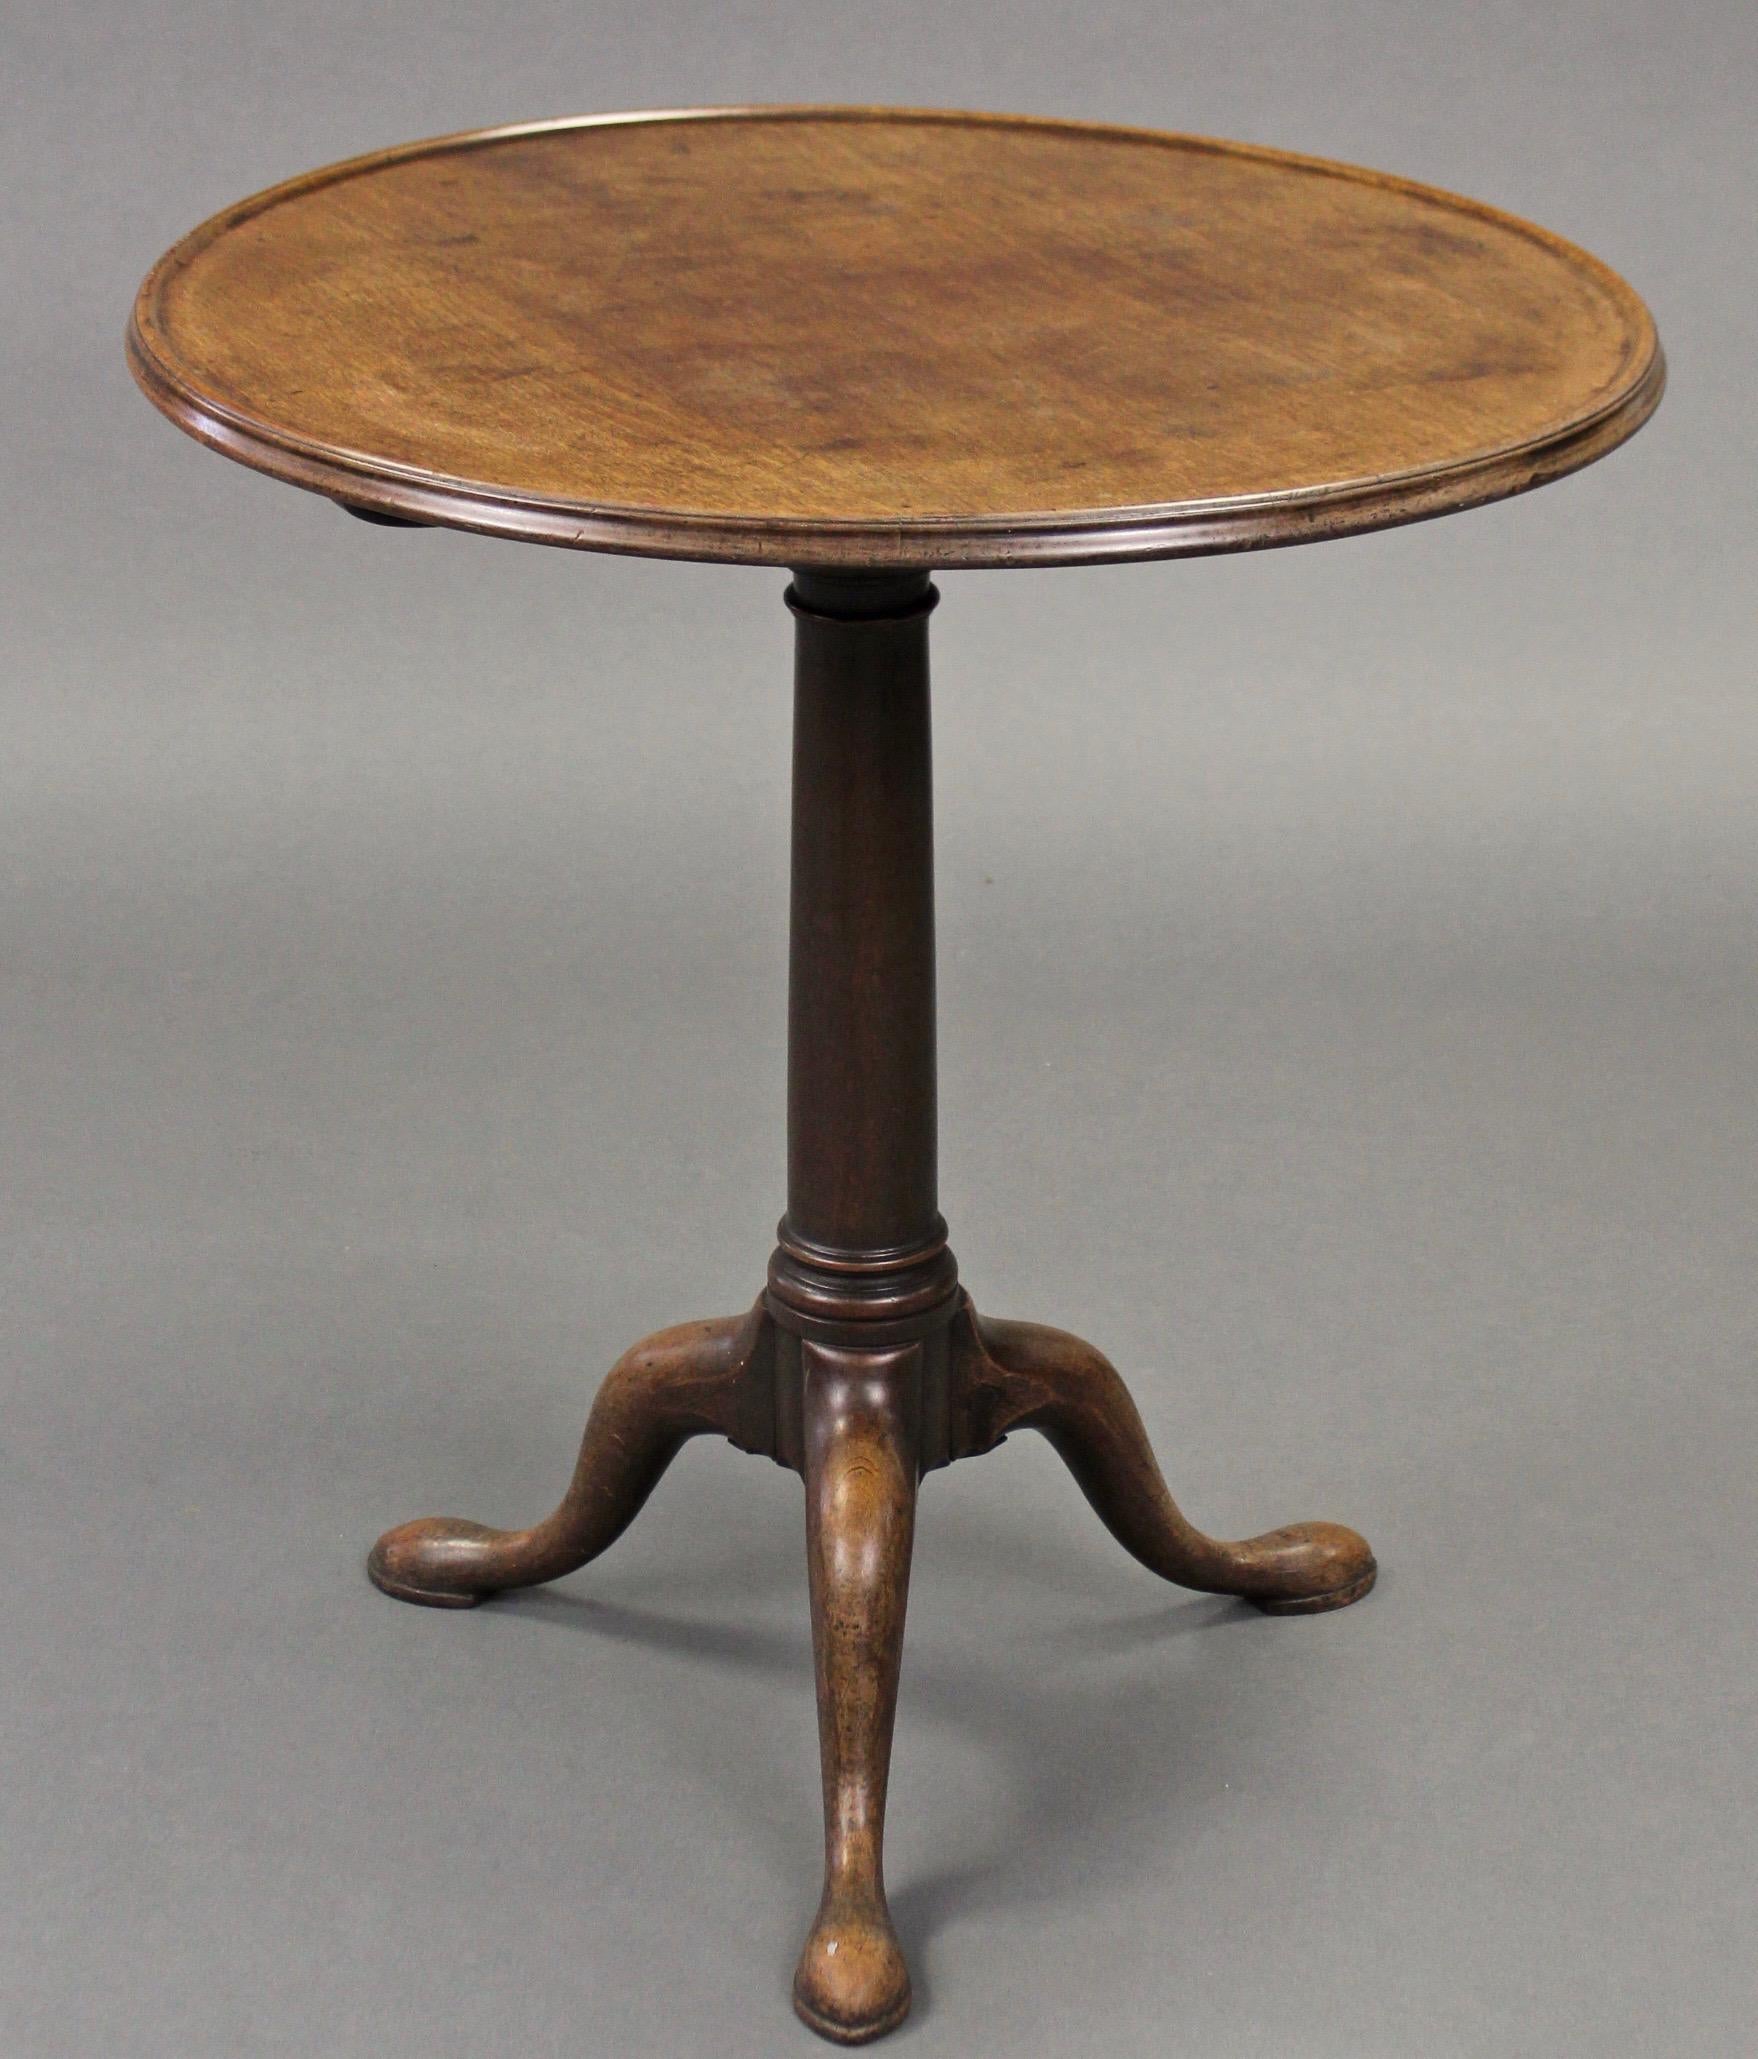 sA late 18th century Chippendale period George III mahogany tray topped tripod table, or as also known 'snap top table', circa 1770-1790, England. 

The circular tray top with moulded edge is raised on a gun-barrel centre column and cabriole legs